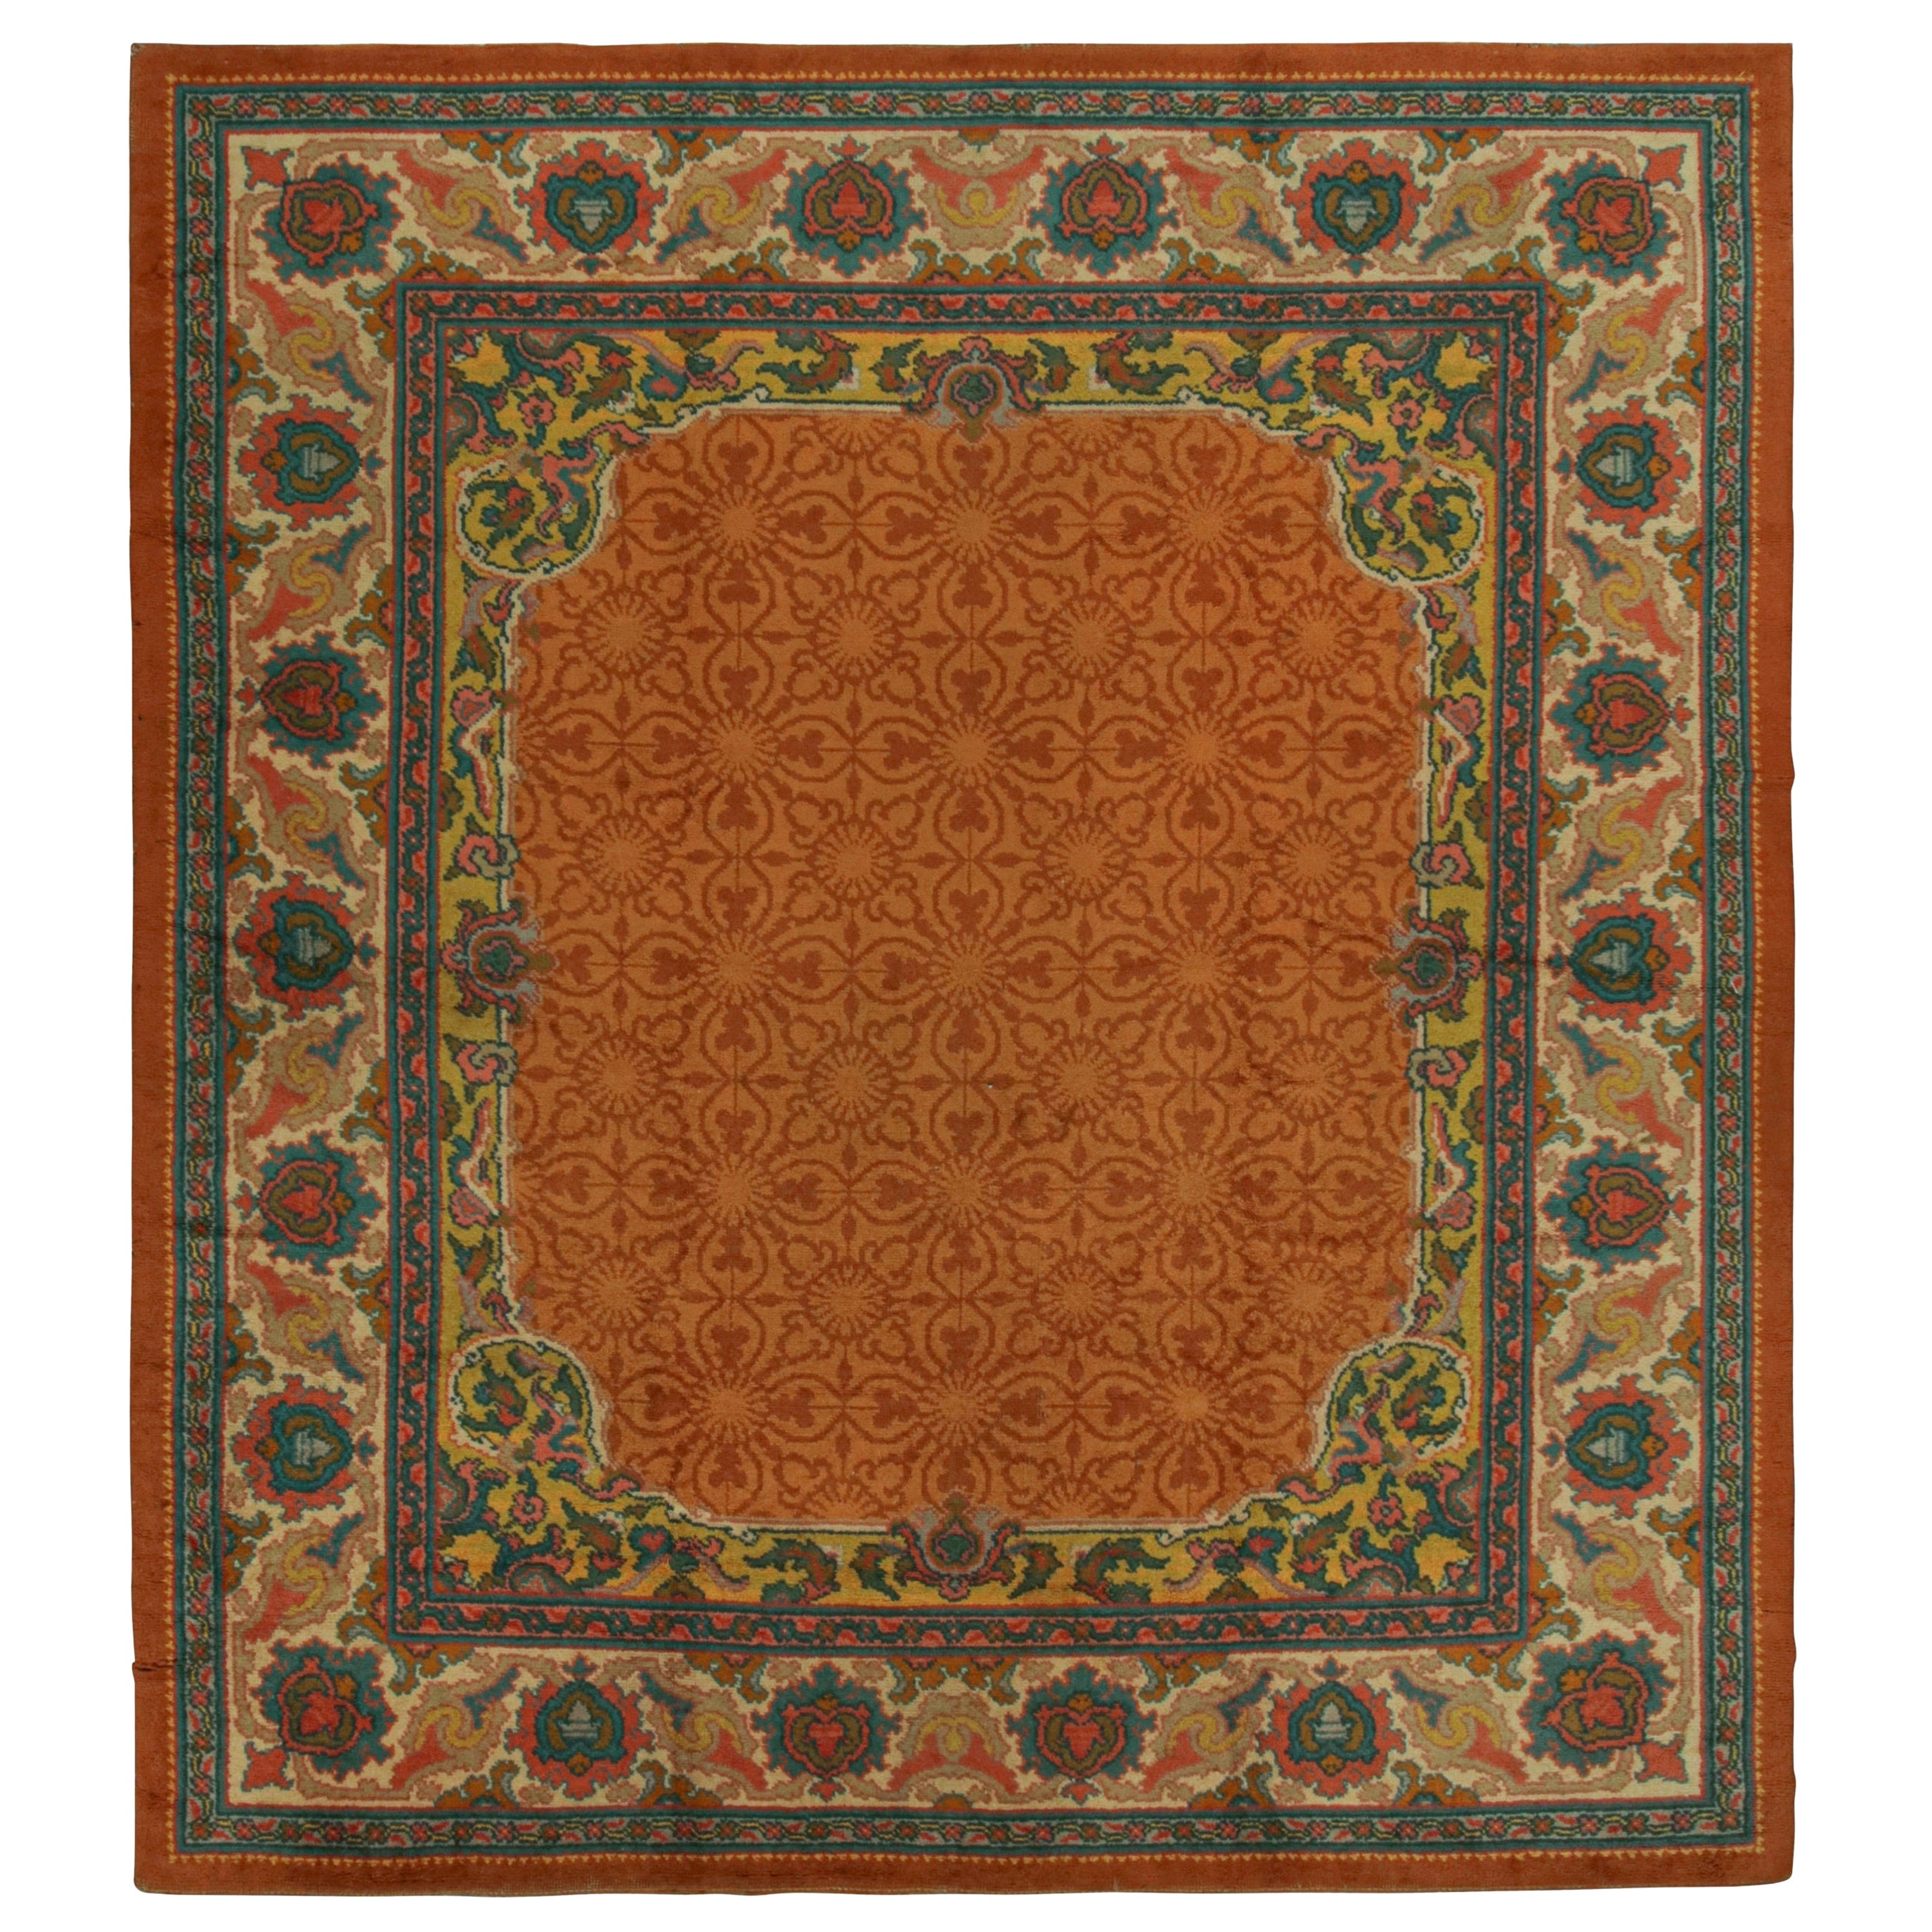 Antique Donegal Arts & Crafts Rug in Orange with Floral Pattern